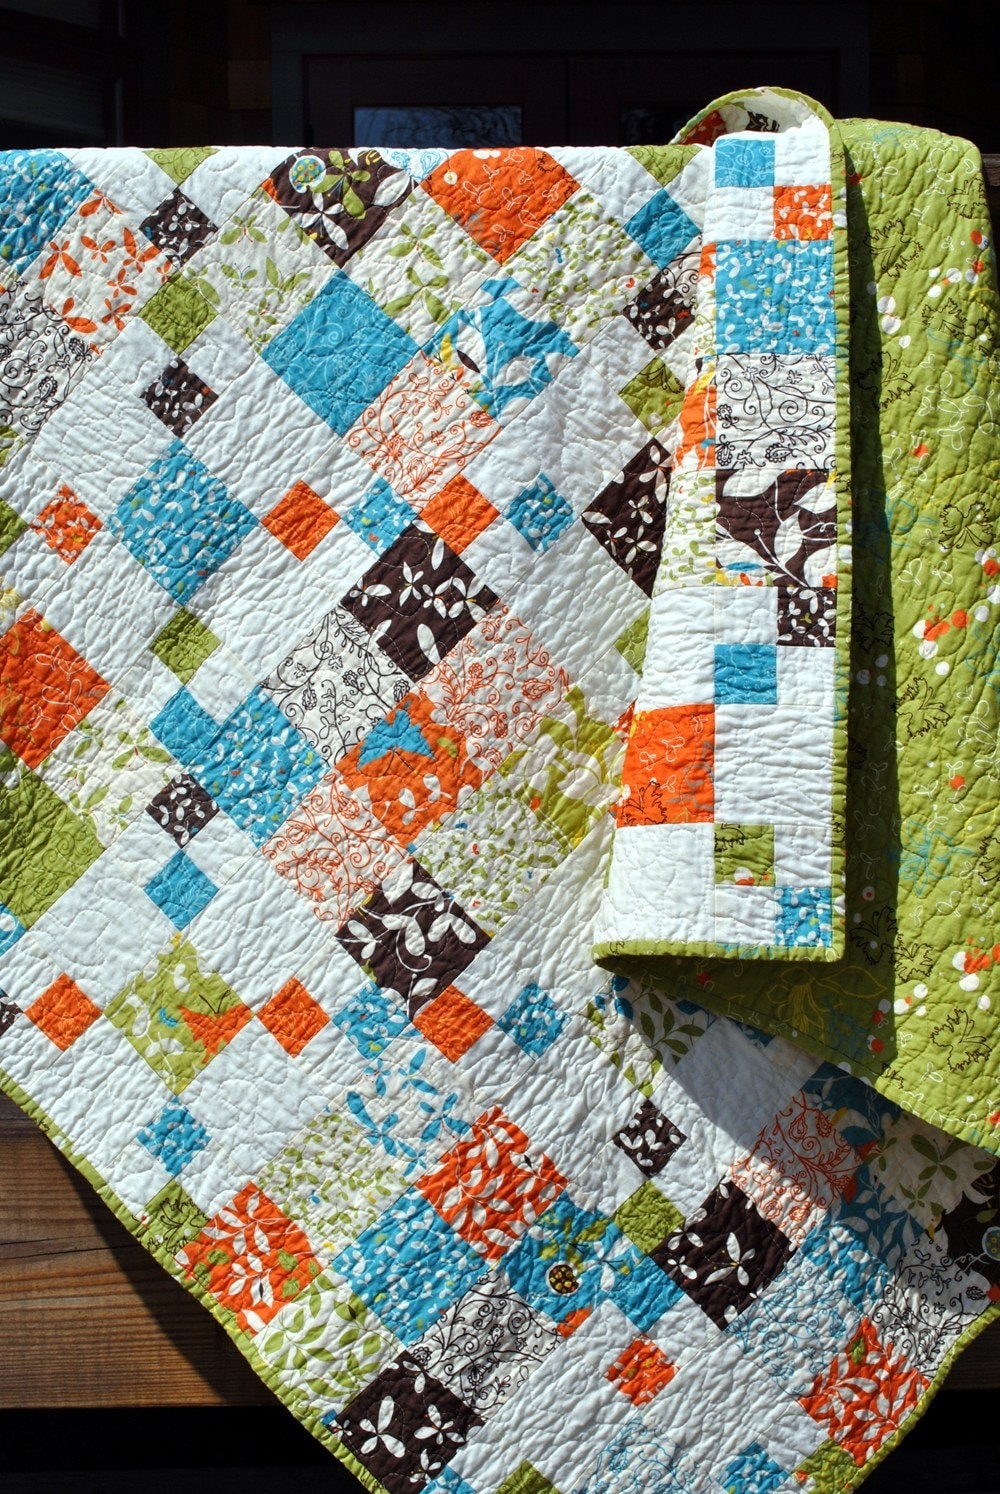 Patchwork QUILT Lap quilt or twin coverlet  pattern also